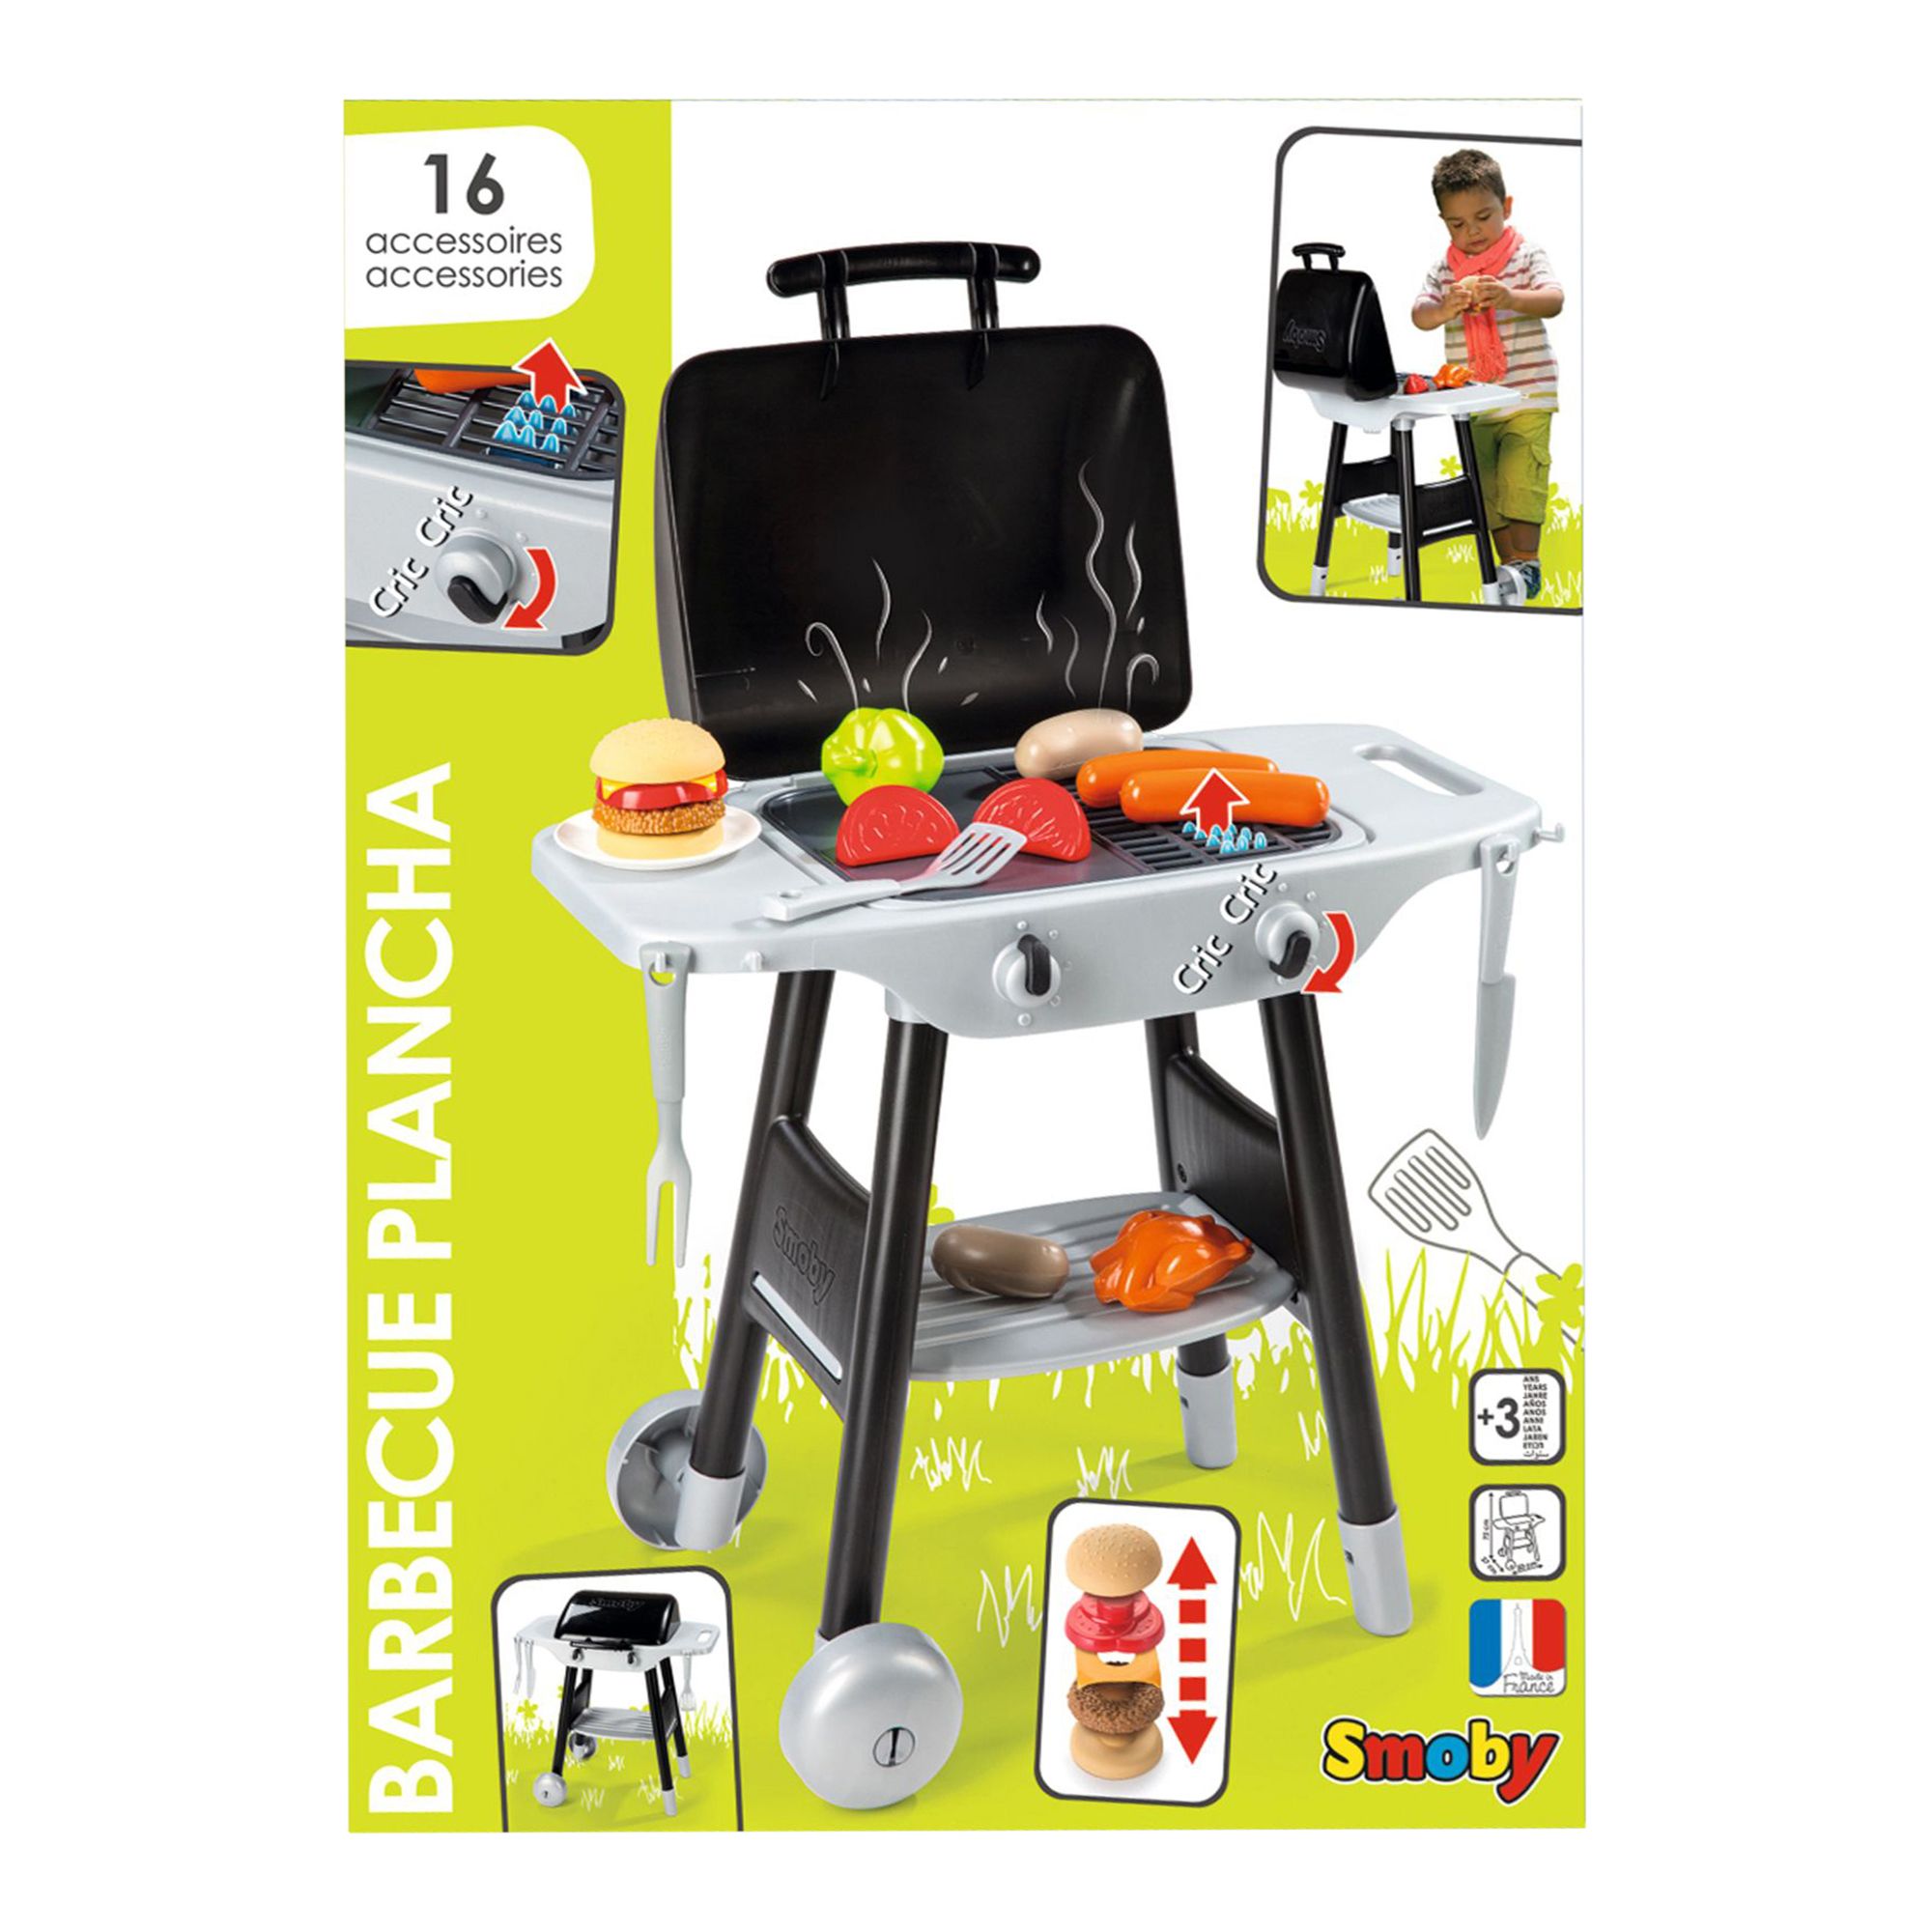 Europa Offer diagonaal Smoby BBQ Plancha Play Grill with Accessories - BJs Wholesale Club